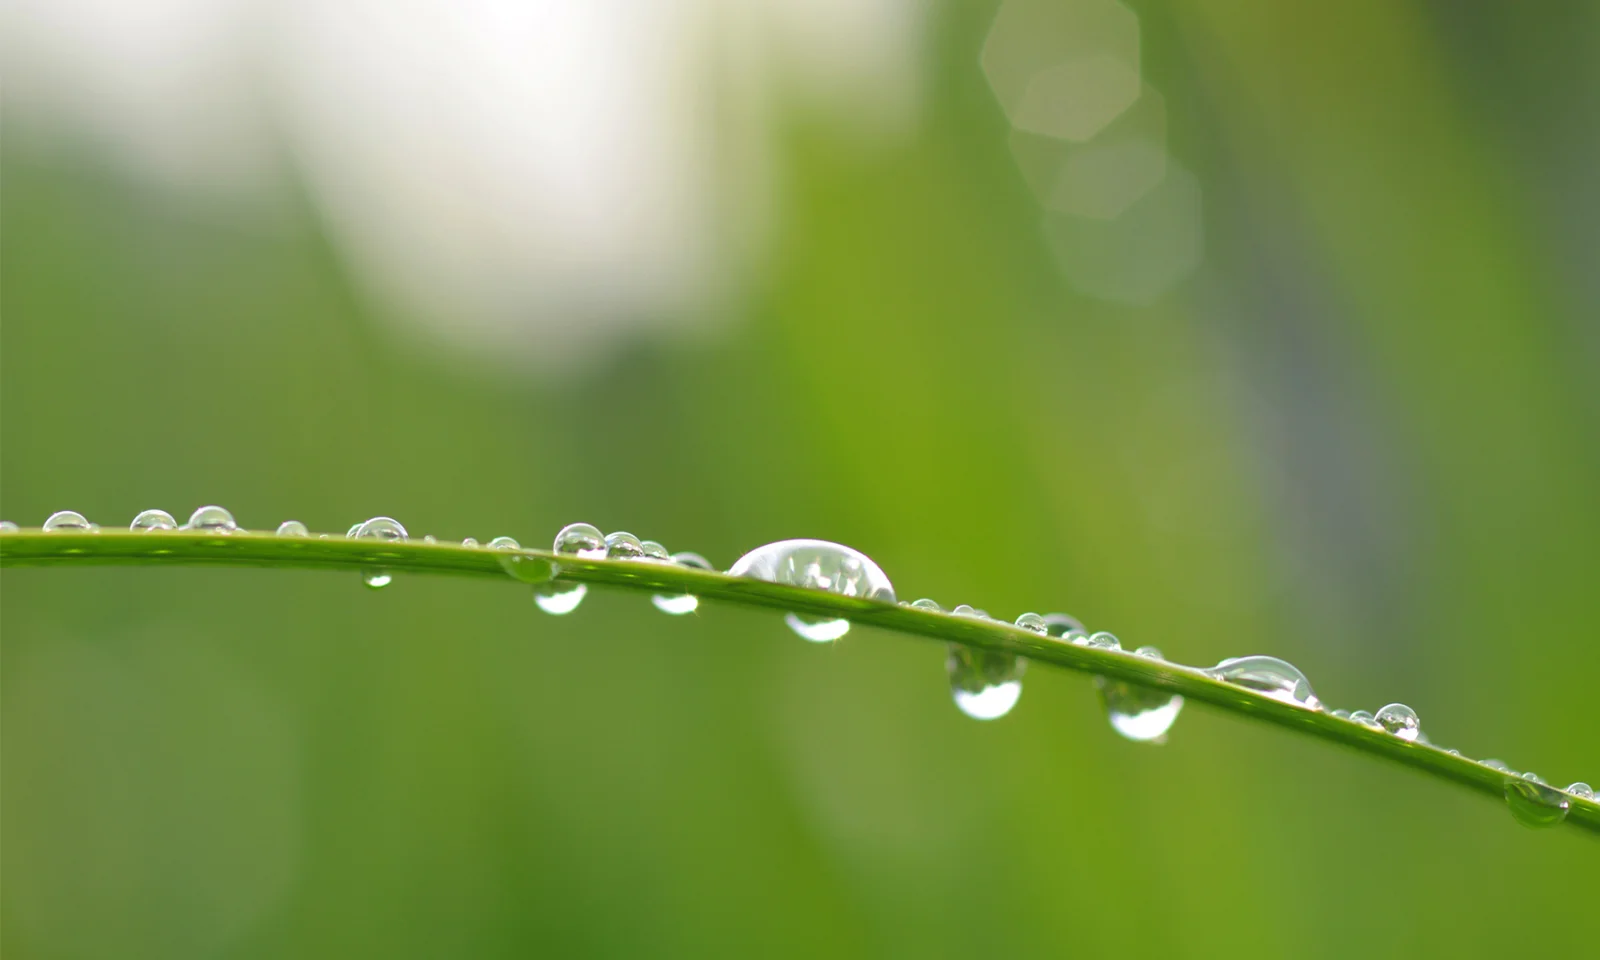 The image features a close-up view of dew drops delicately resting on a blade of grass against a lush green, blurred background. This serene and natural scene symbolizes growth, sustainability, and the nurturing aspects of environmental initiatives. The simplicity and clarity of the image make it an ideal visual representation for a blog discussing the external factors and benefits of green bonds, particularly in the context of OMFIF (Official Monetary and Financial Institutions Forum) and sustainable finance.